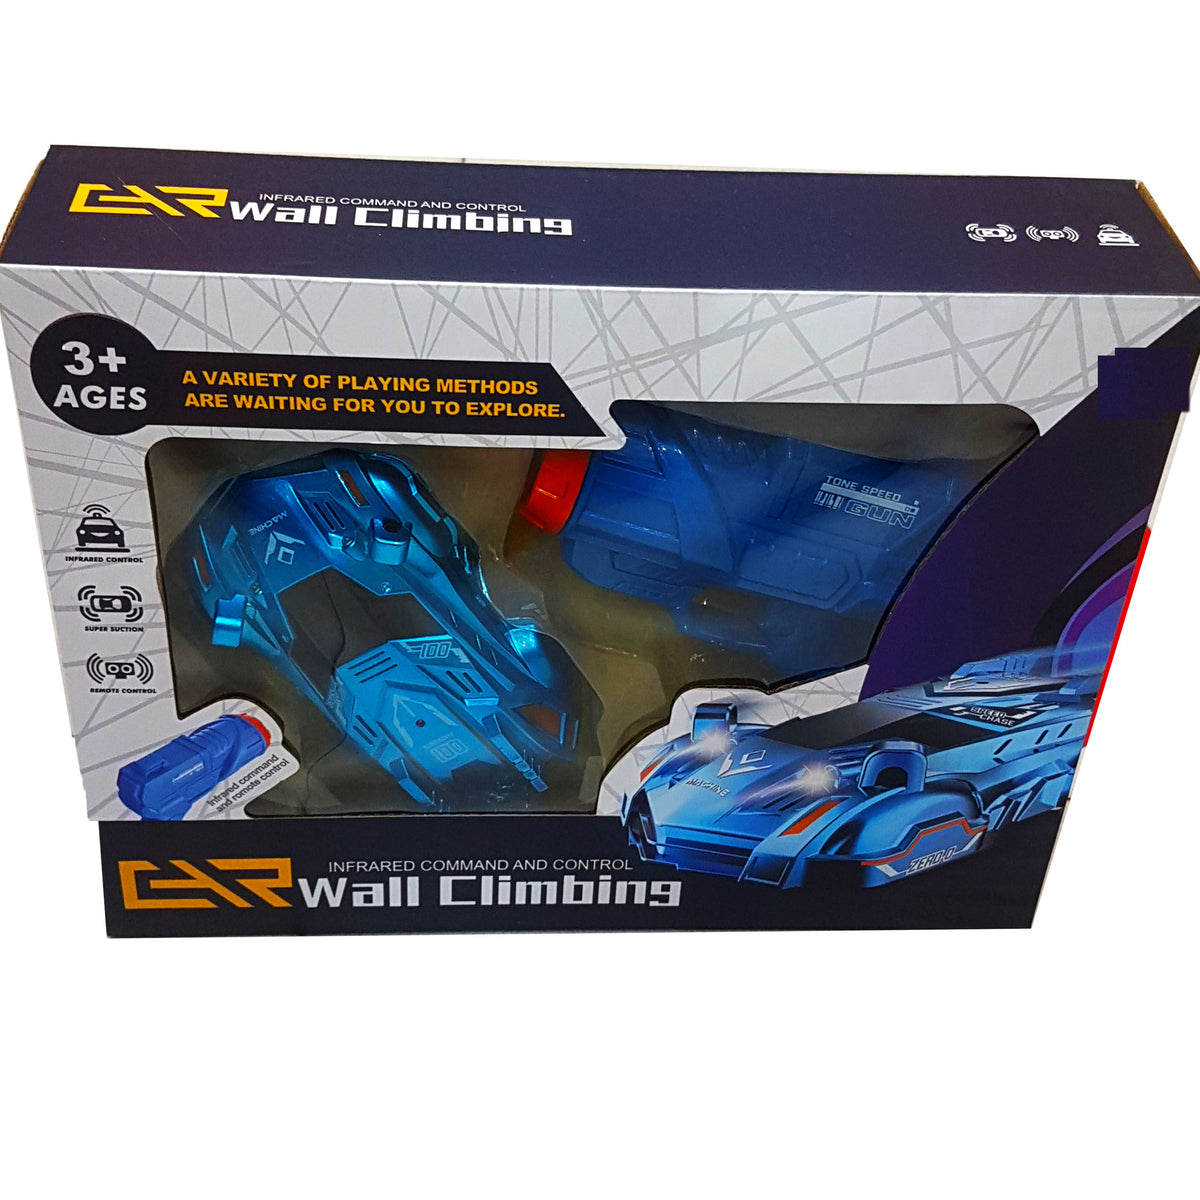 New Arrival: Remote Control Wall Climbing Car with Super Suction - Infrared Controlled Toy for Boys, Capable of Ground, Wall, and Ceiling Walking